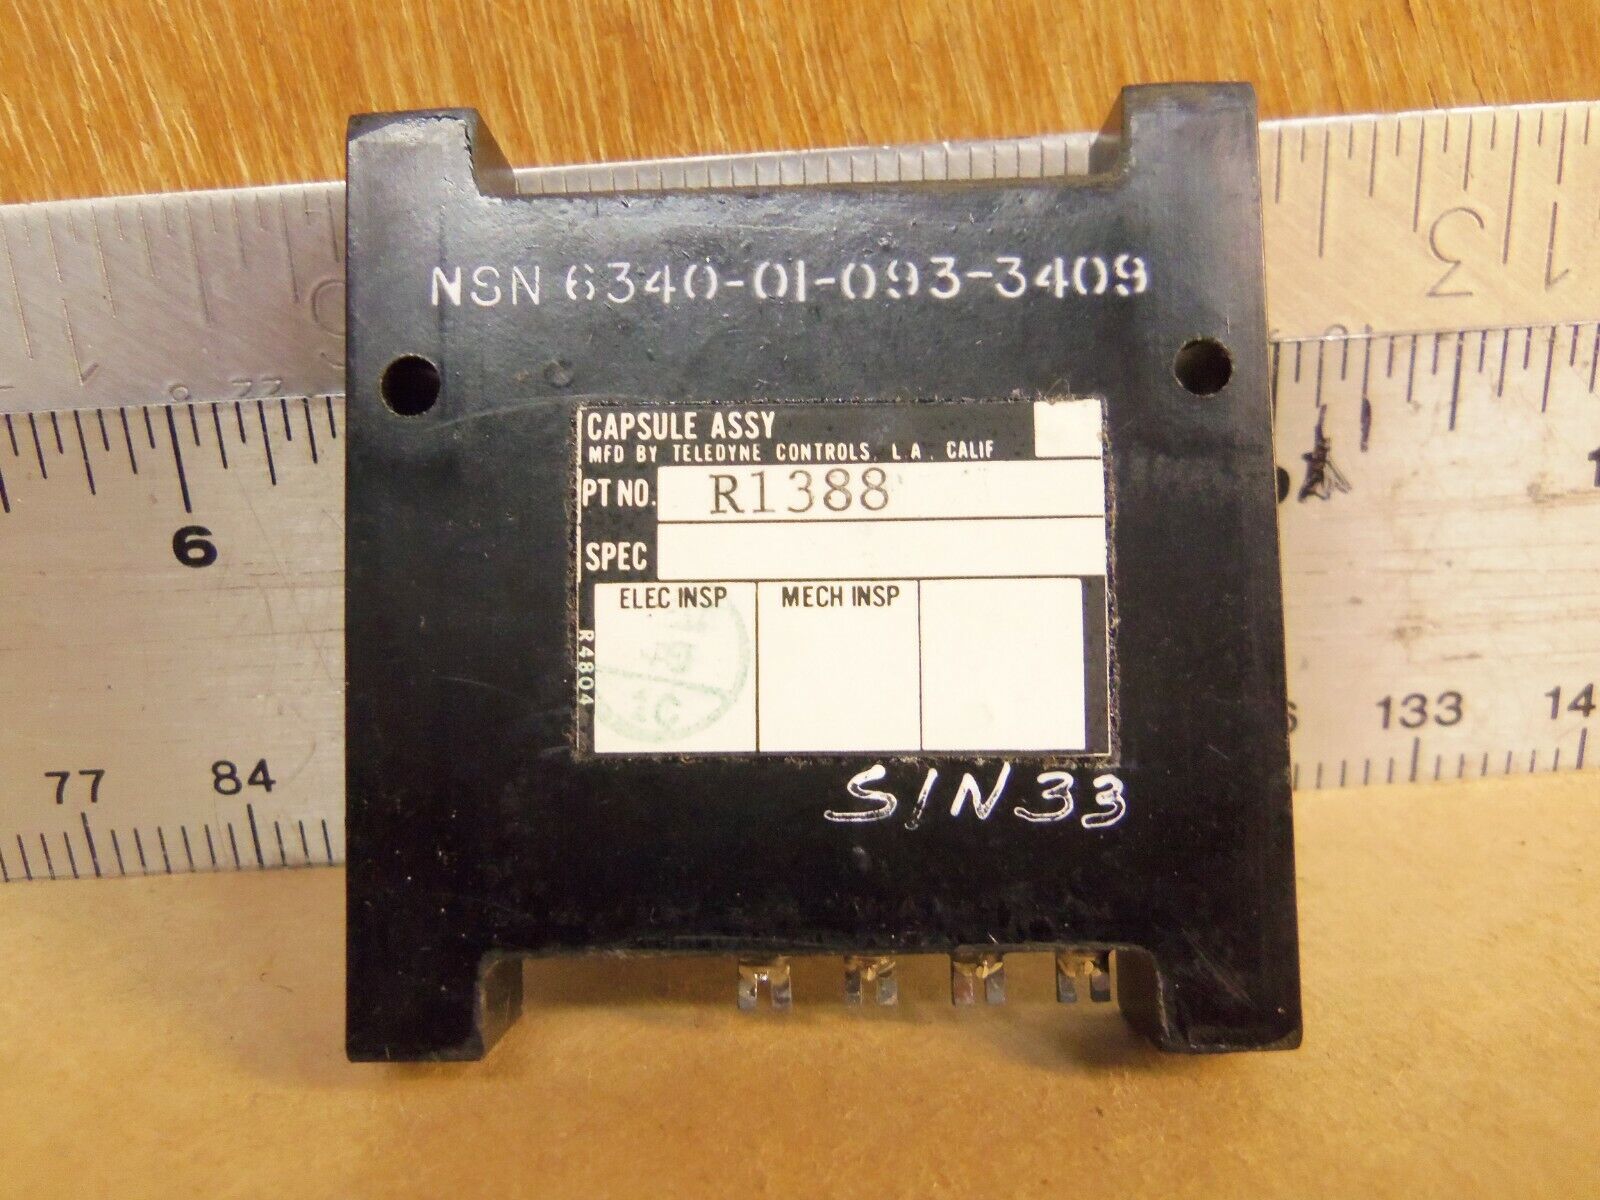 Teledyne Controls - Capsule Assembly for B52 - P/N: R1388 (NOS)